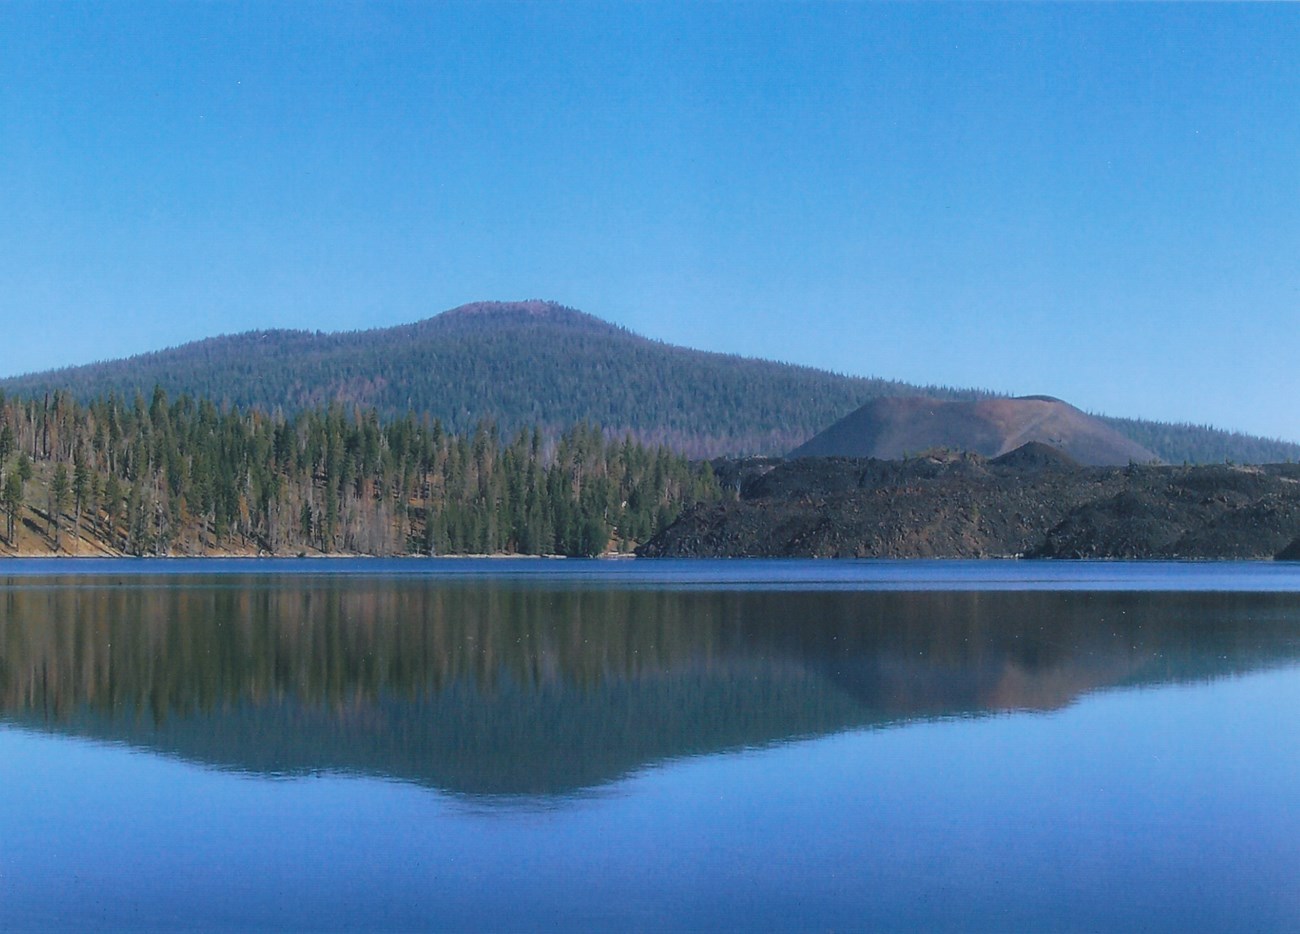 photo of volcanic peaks in the distance and a lake in the foreground.